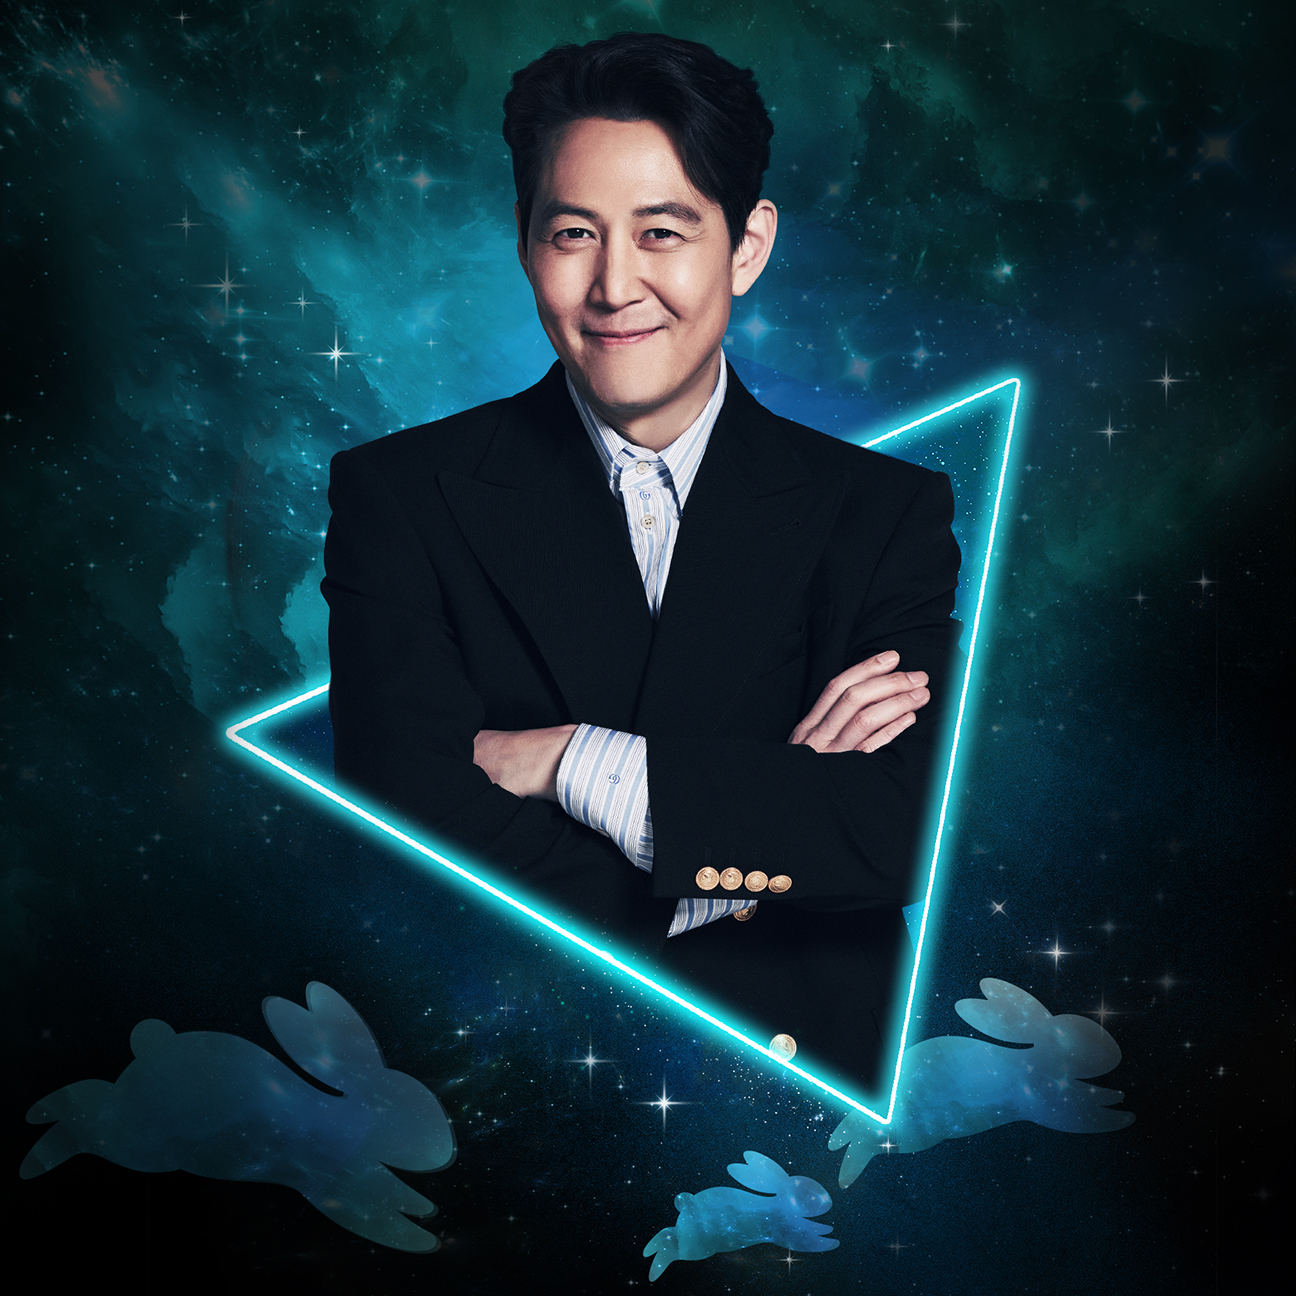 Lee Jung-jae, the Actor from the 2023 Visionary of CJ ENM.